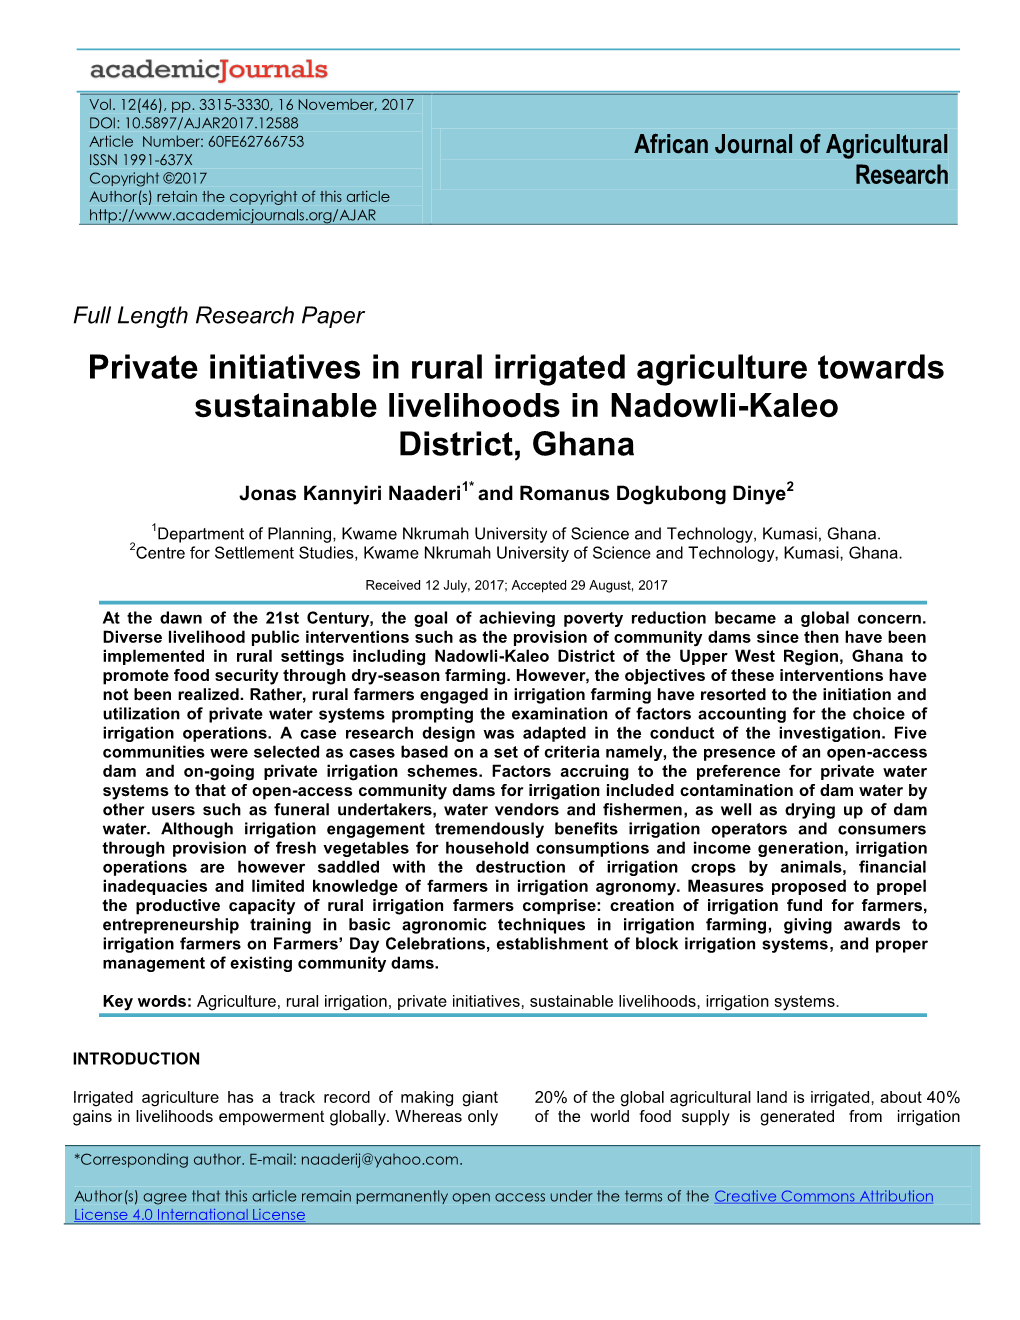 Private Initiatives in Rural Irrigated Agriculture Towards Sustainable Livelihoods in Nadowli-Kaleo District, Ghana